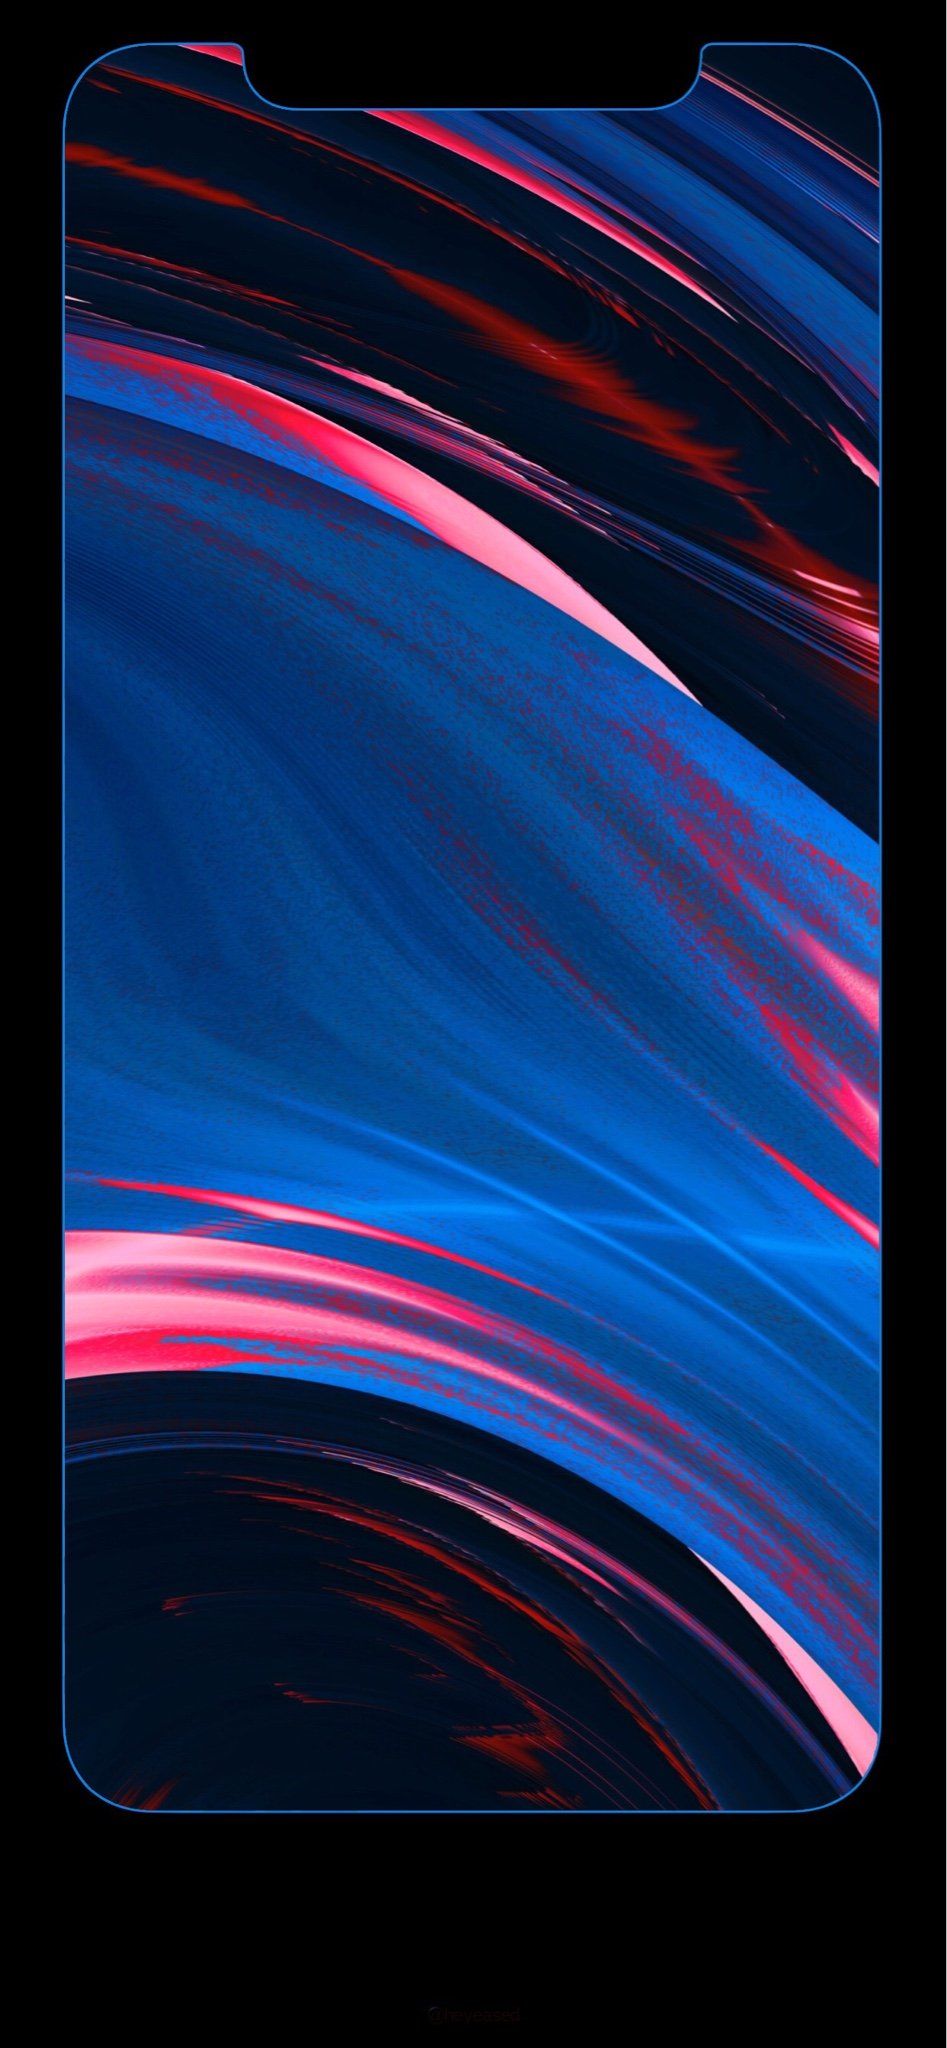 The iPhone Pro Max Wallpaper Thread, iPad, iPod Forums at iMore.com